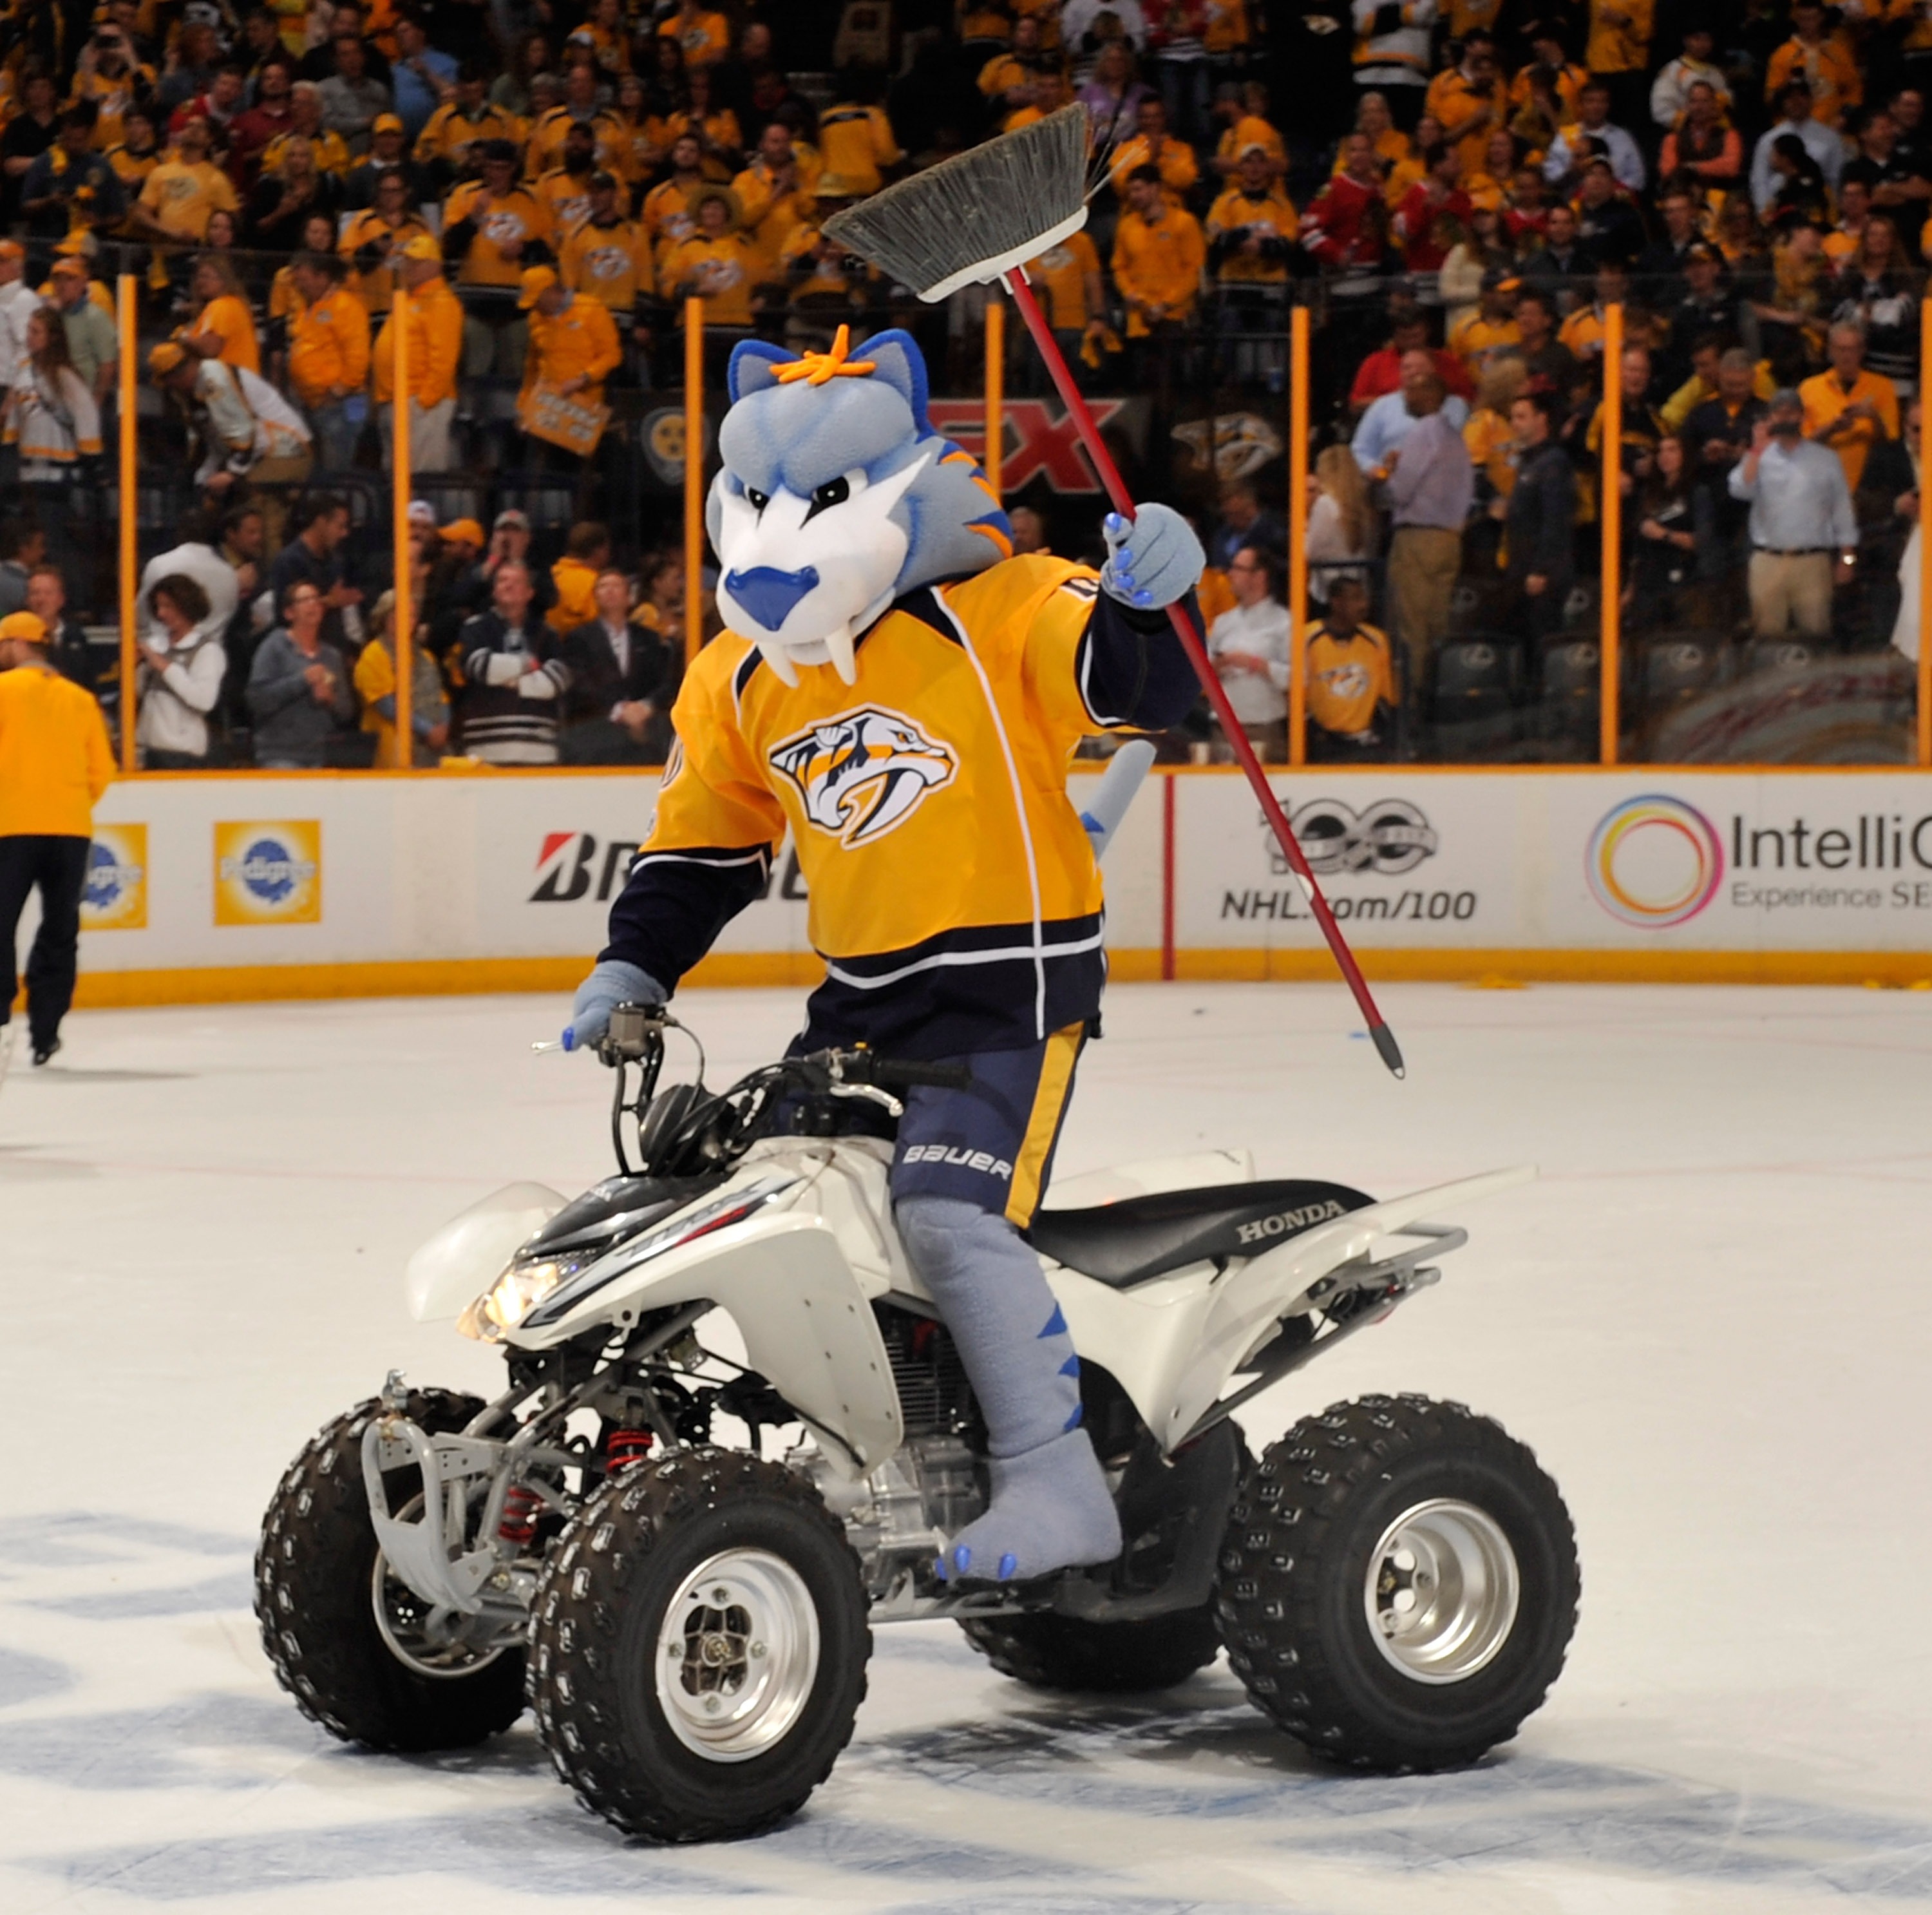 NASHVILLE, TN - APRIL 20: Gnash, mascot of the Nashville Predators, holds a broom after a Predators sweep of the Chicago Blackhawks in a 4-1 Predator victory in Game Four of the Western Conference First Round against the Chicago Blackhawks during the 2017 NHL Stanley Cup Playoffs at Bridgestone Arena on April 20, 2017 in Nashville, Tennessee. (Photo by Frederick Breedon/Getty Images)